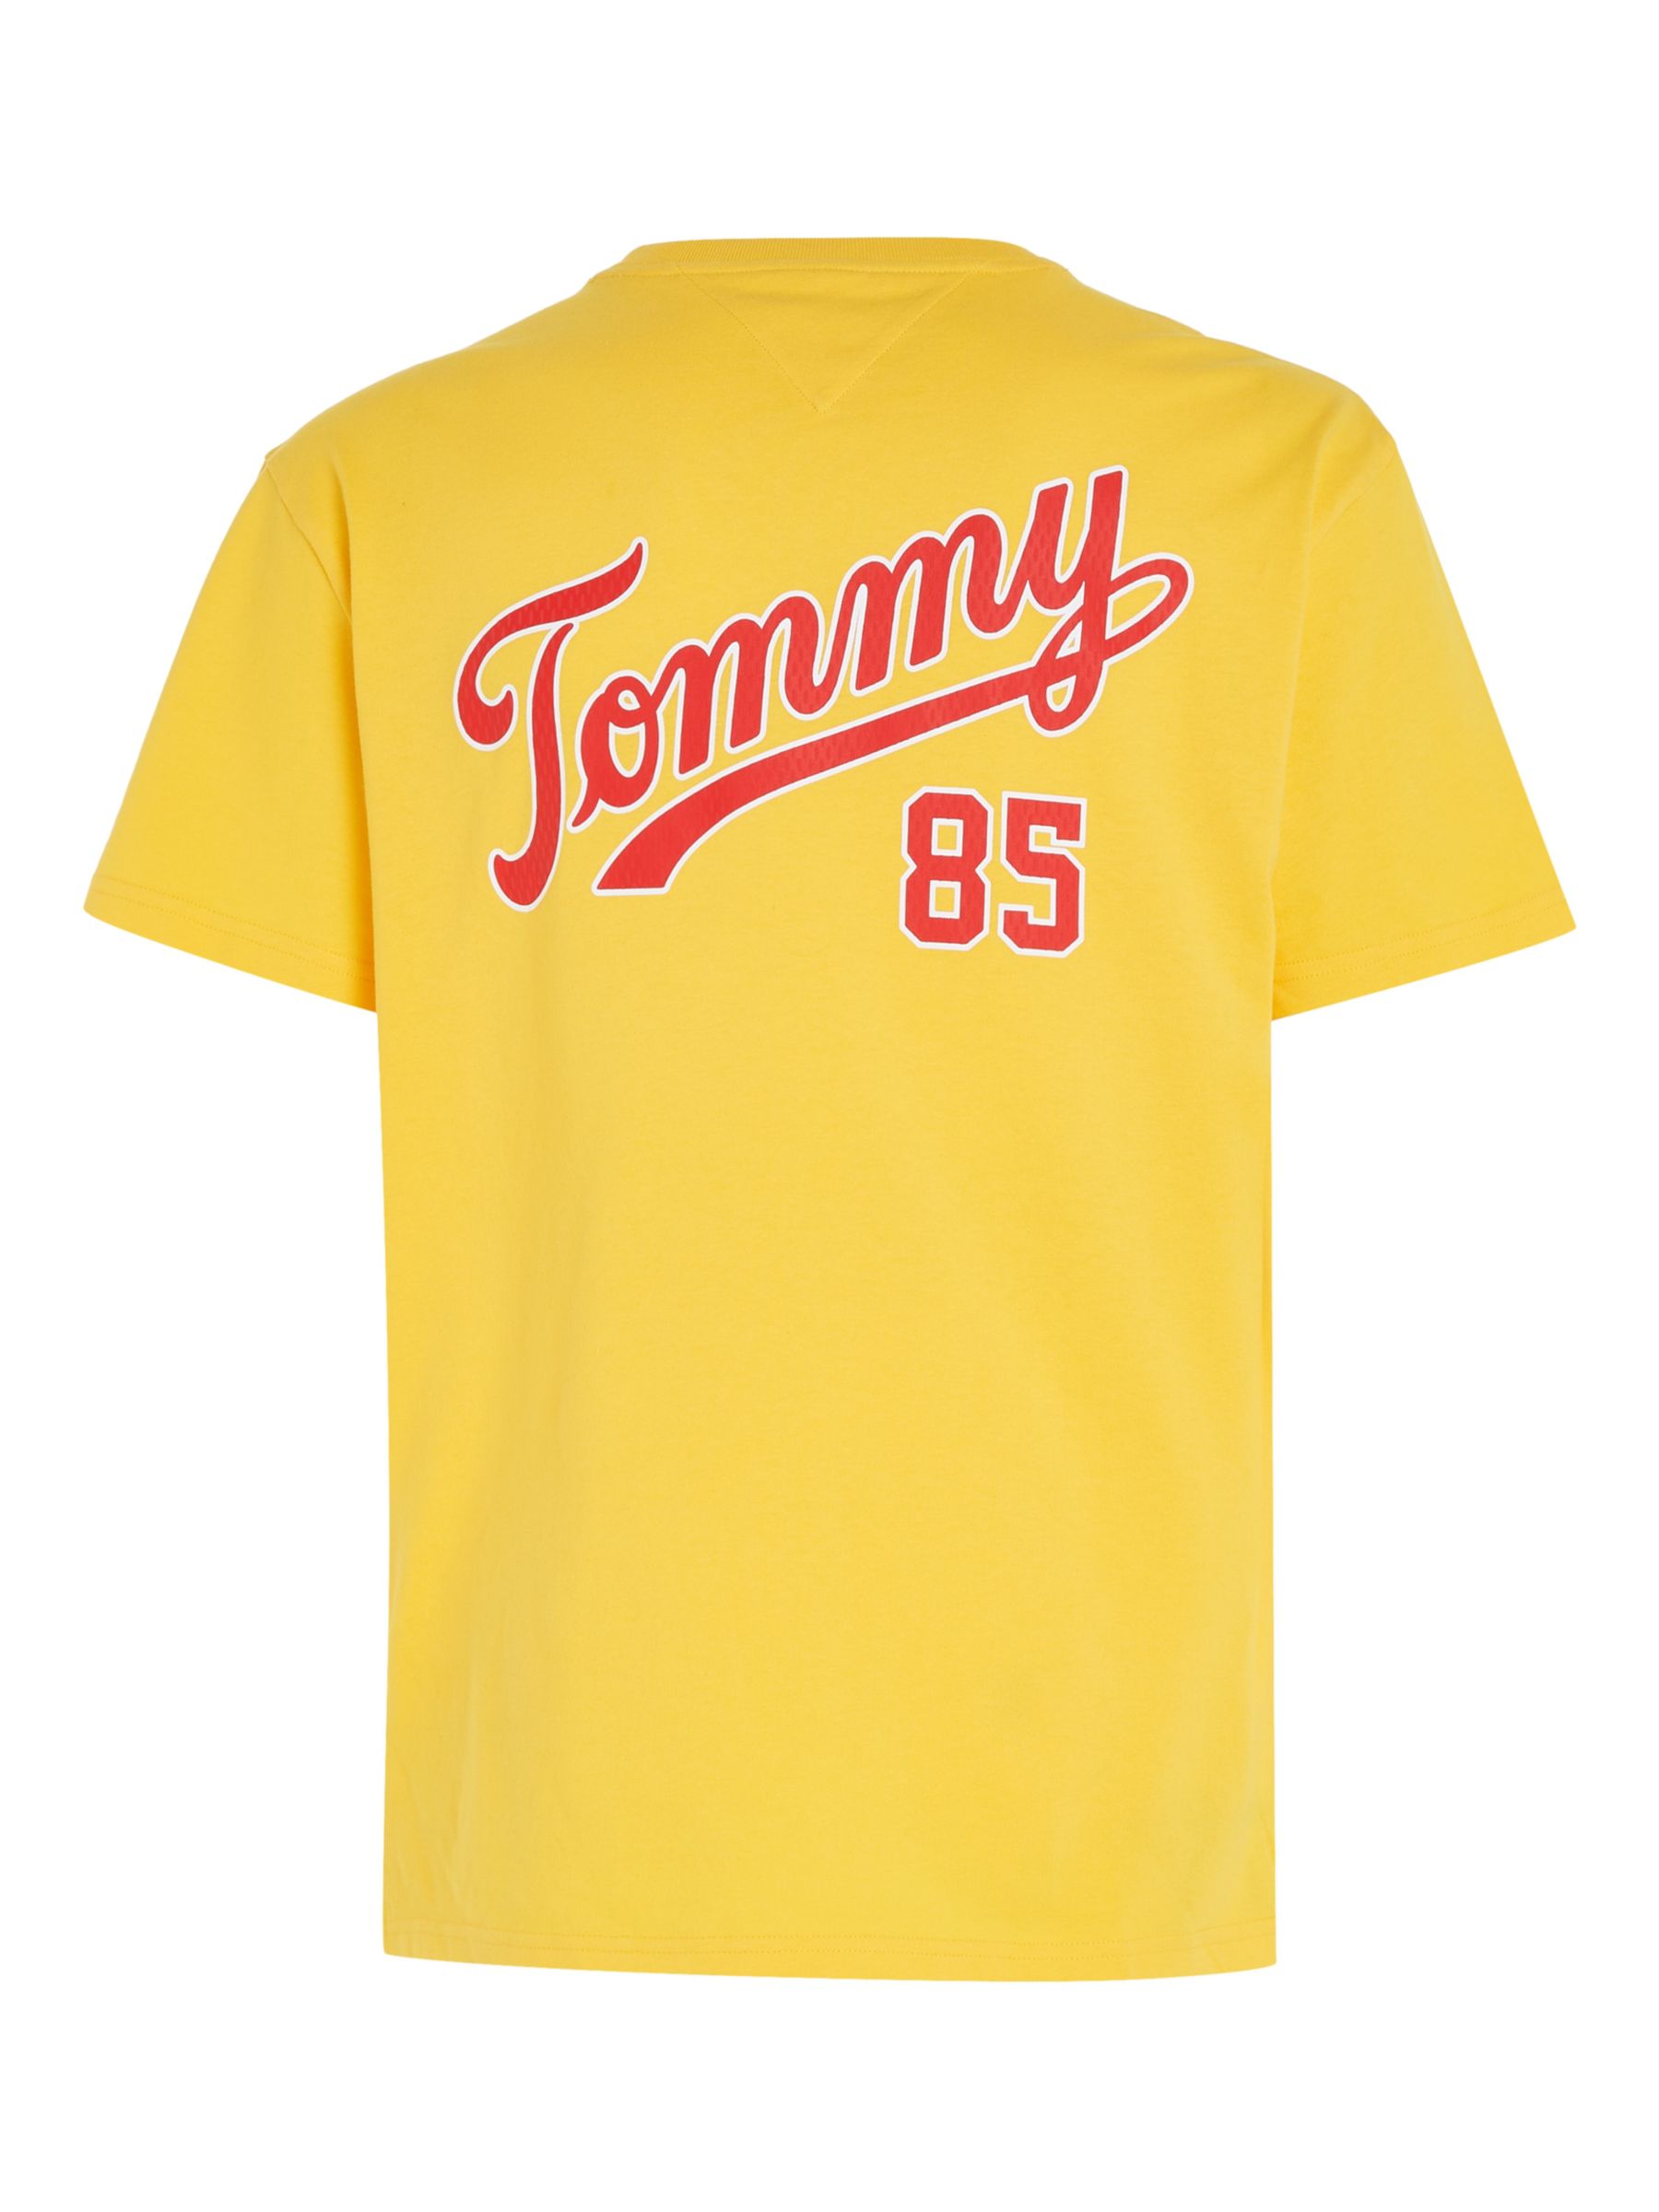 Tommy Jeans Organic Cotton College 85 John Partners Lewis Warm & at T-Shirt, Yellow Logo